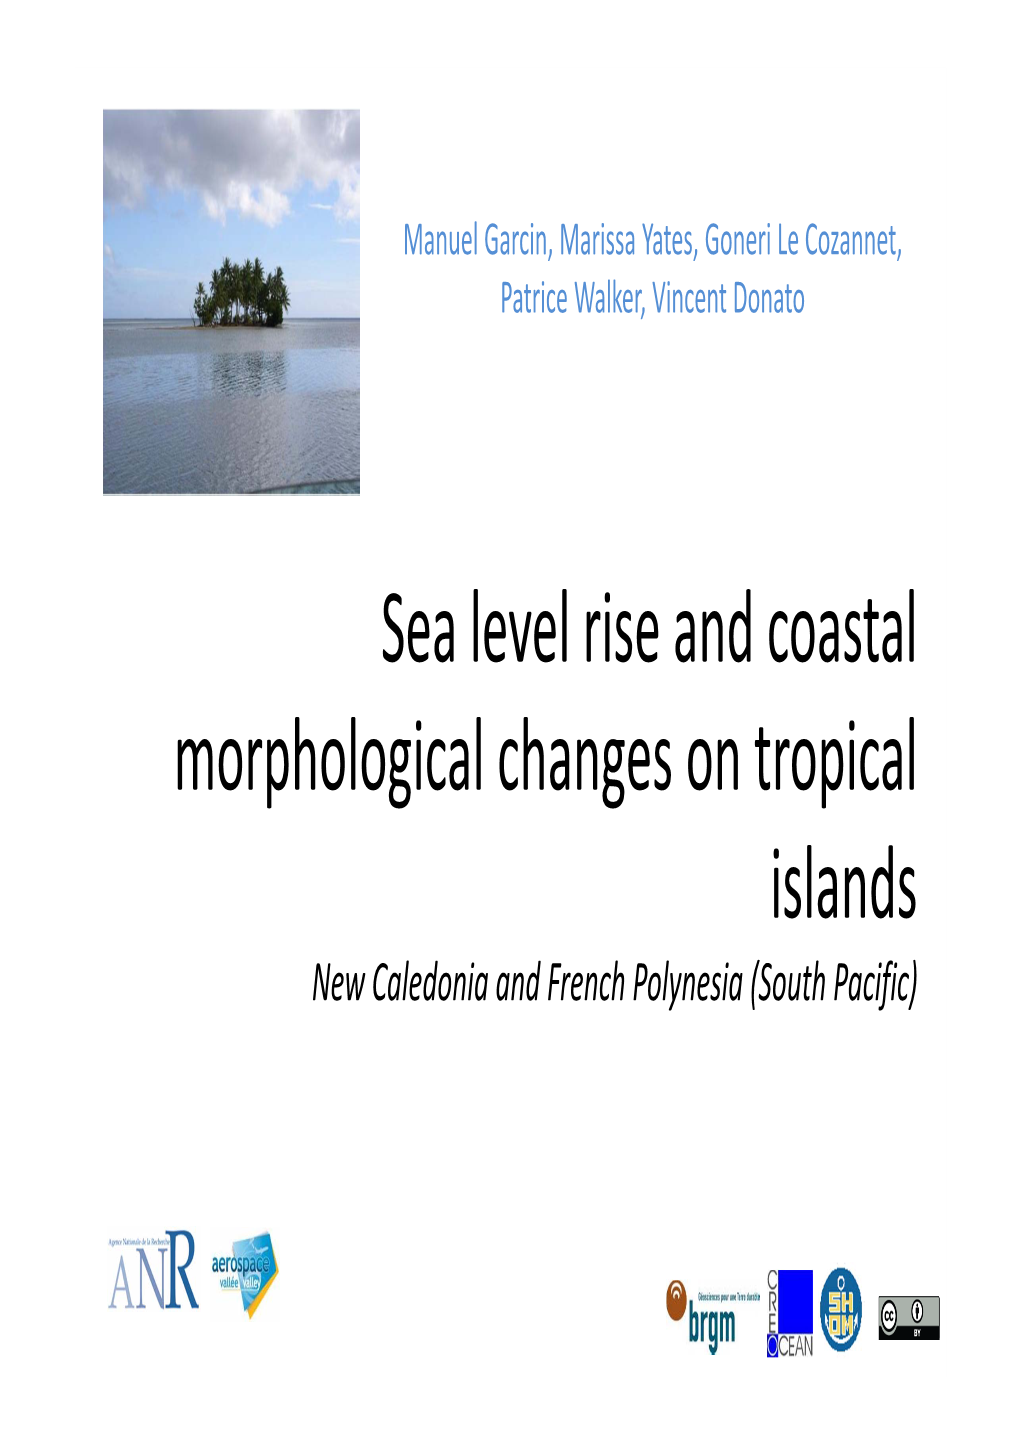 Sea Level Rise and Coastal Morphological Changes on Tropical Islands New Caledonia and French Polynesia (South Pacific) the Project